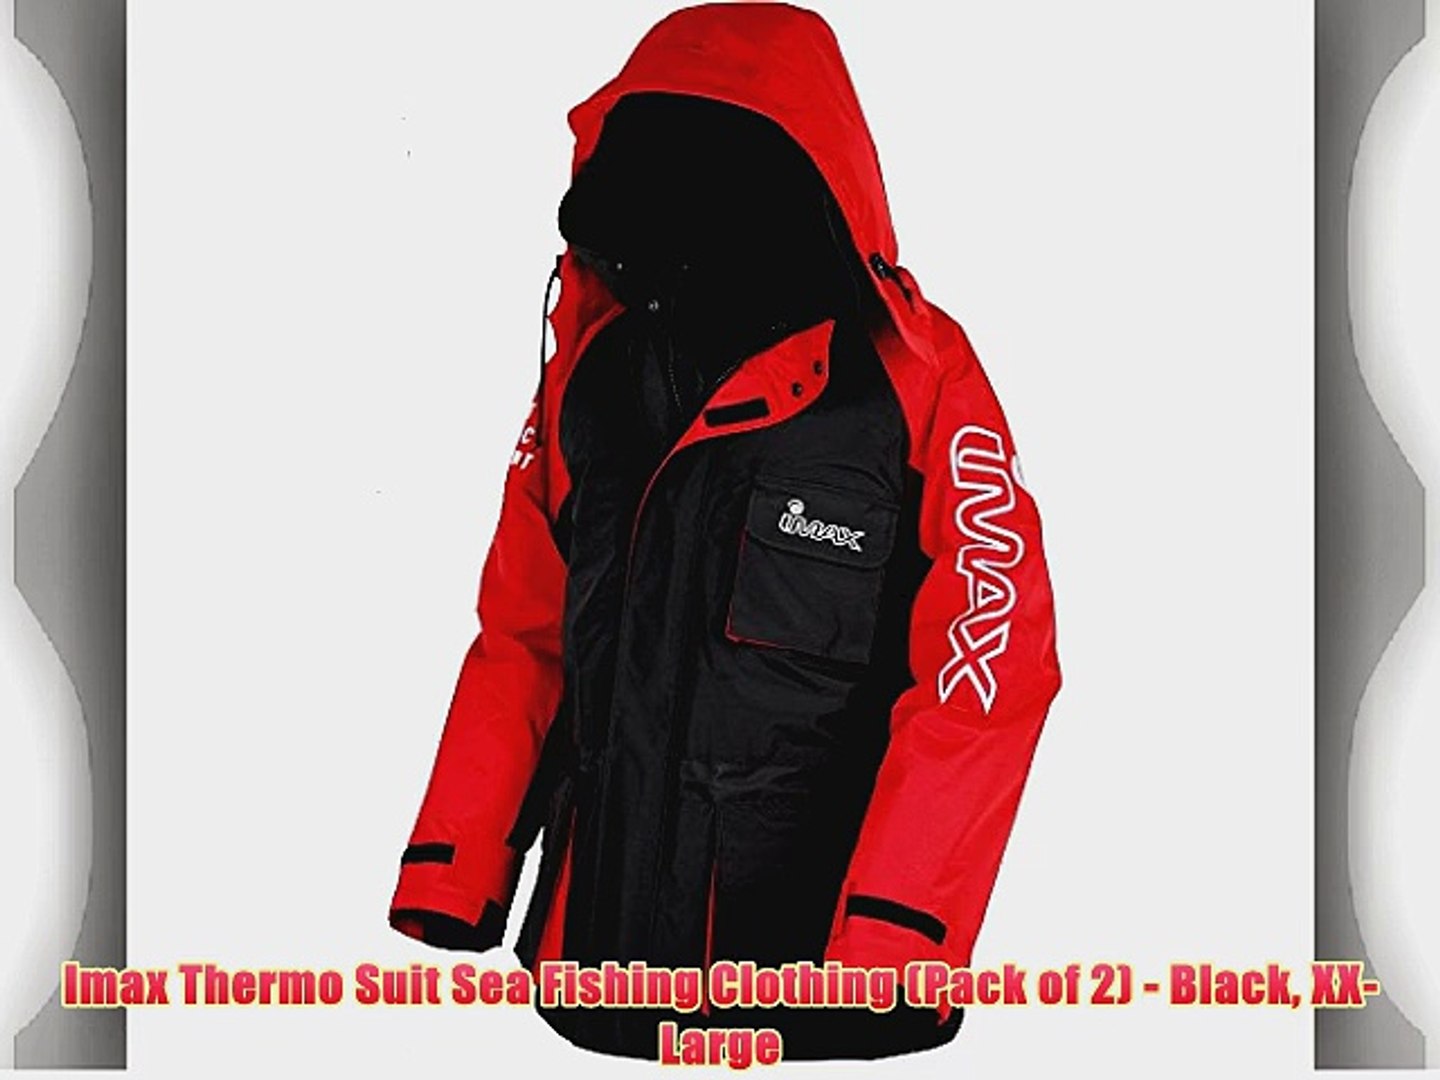 Imax Thermo Suit Sea Fishing Clothing (Pack of 2) - Black XX-Large - video  Dailymotion